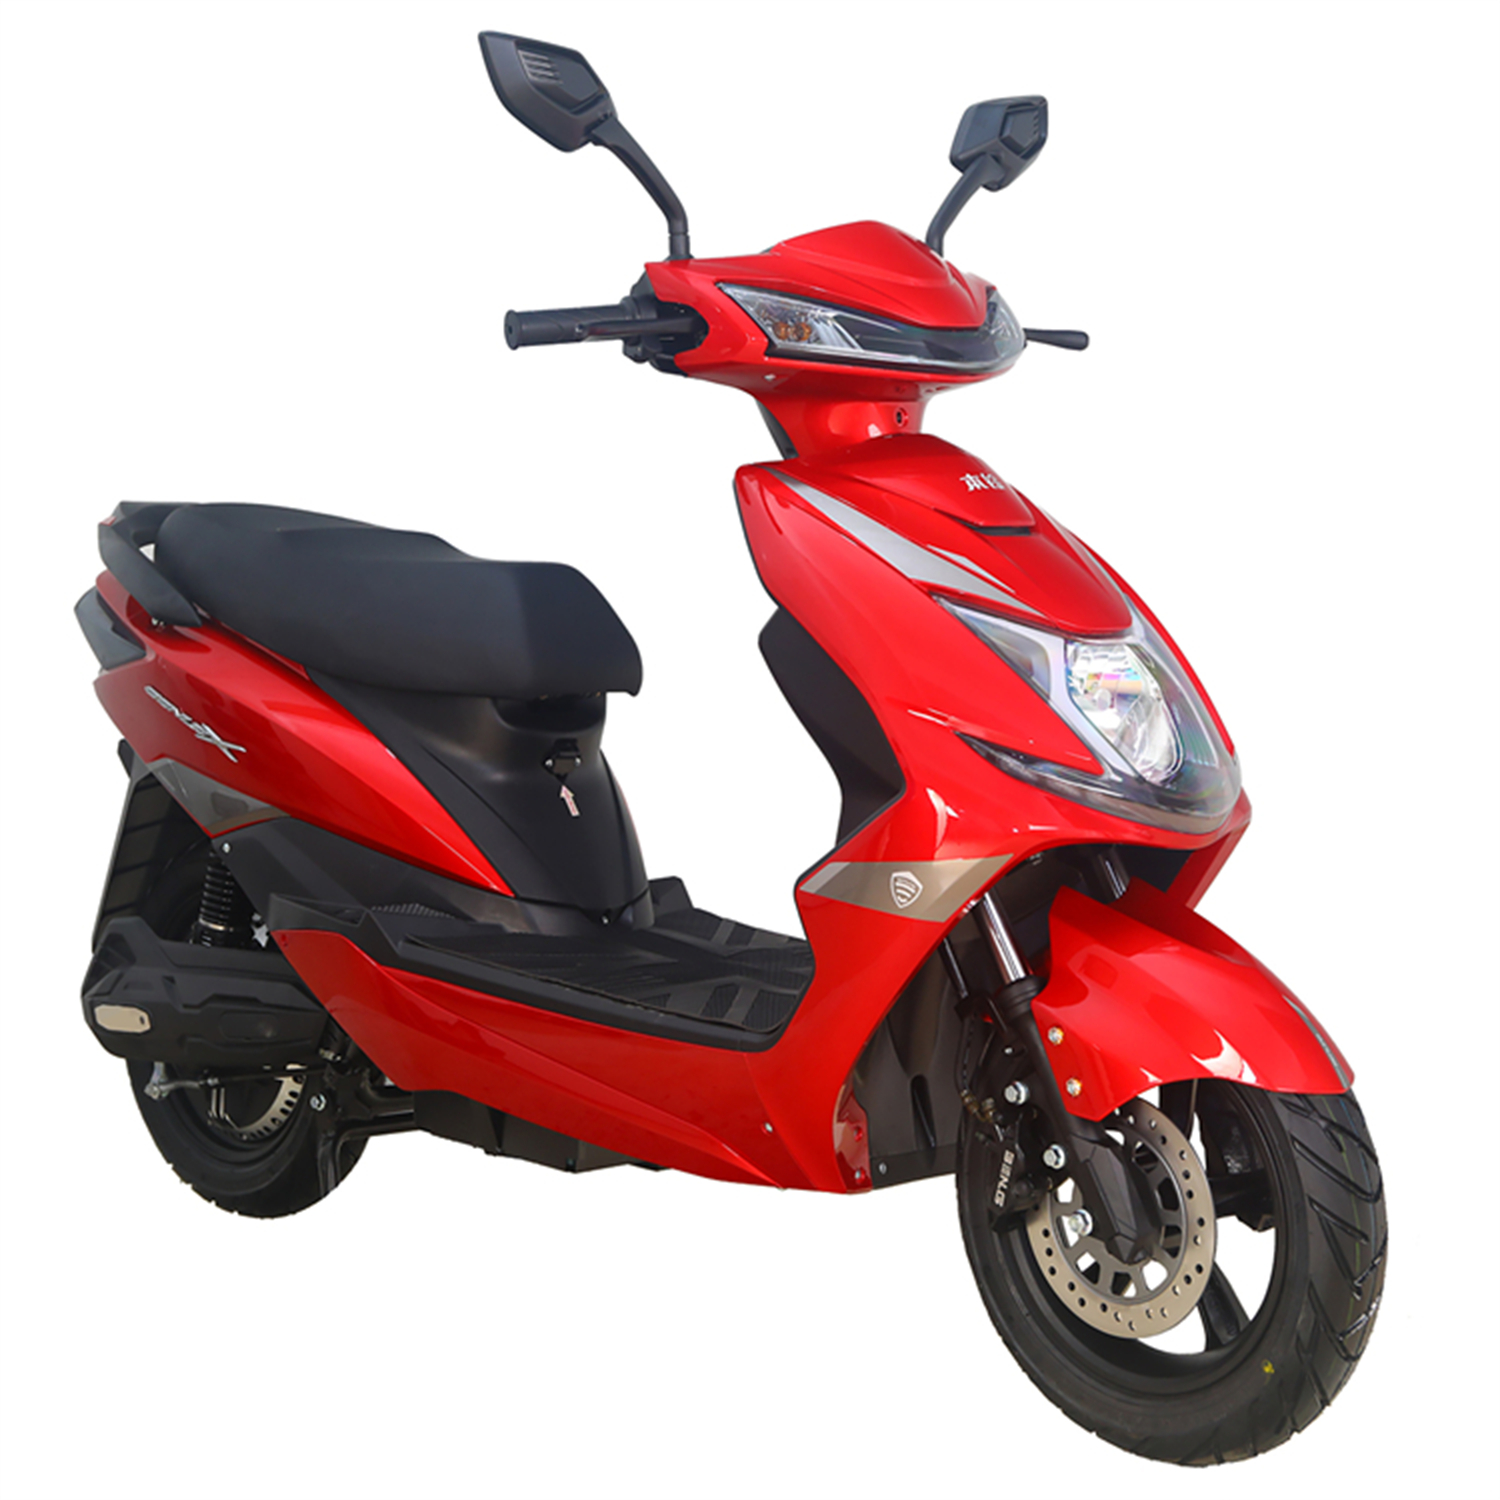 Benlg 72V EAGLE 7 Electric moped 1500W 72V 20Ah cheap electric motorcycle scooter with high quality